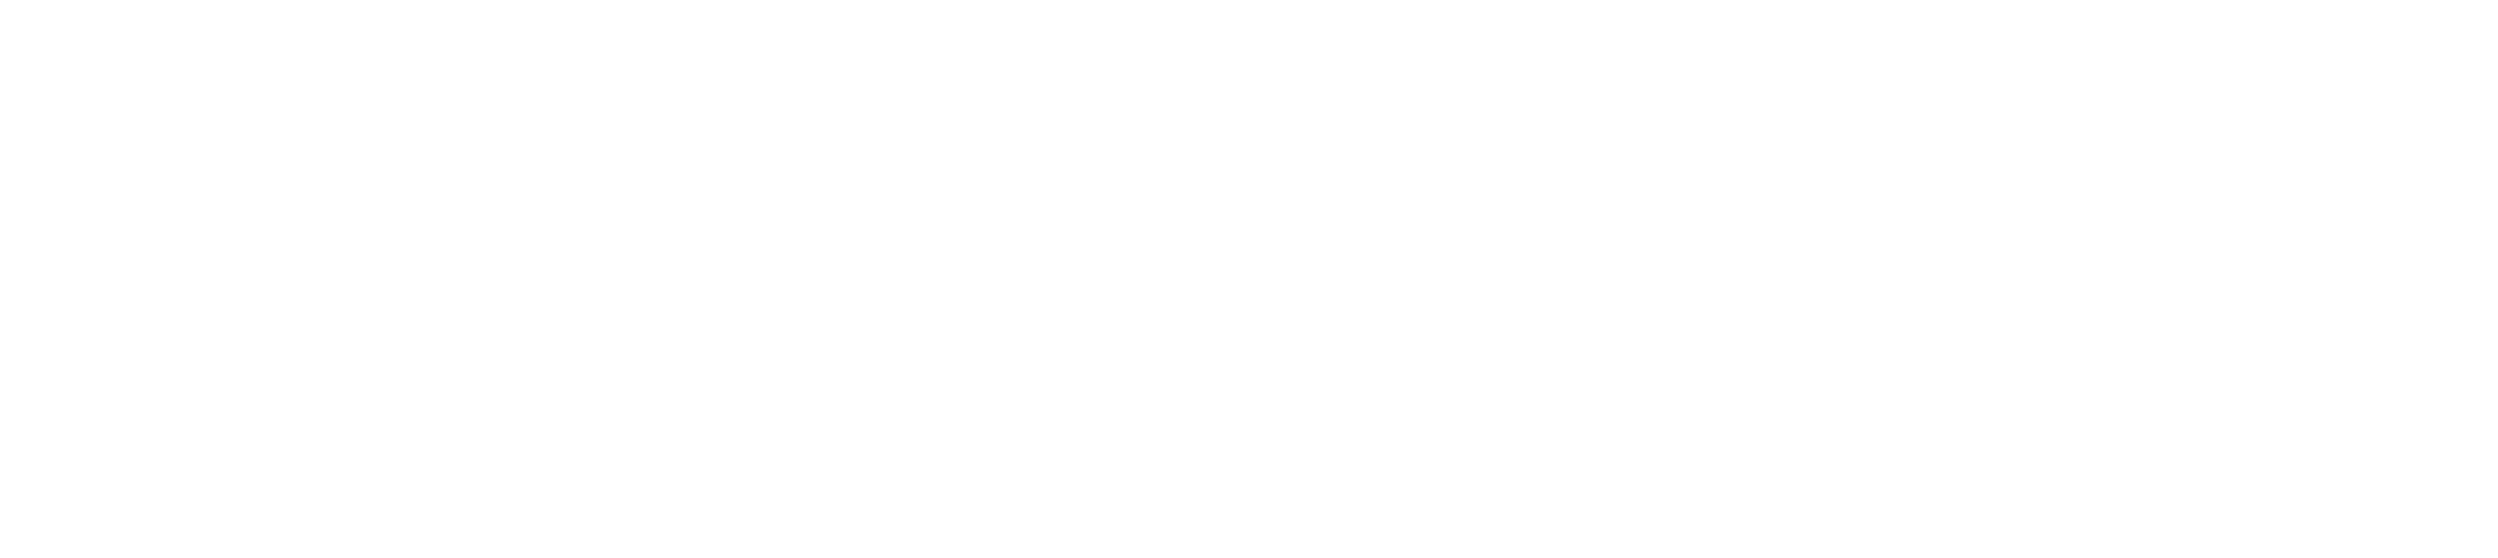 A black and white logo for wire way services.